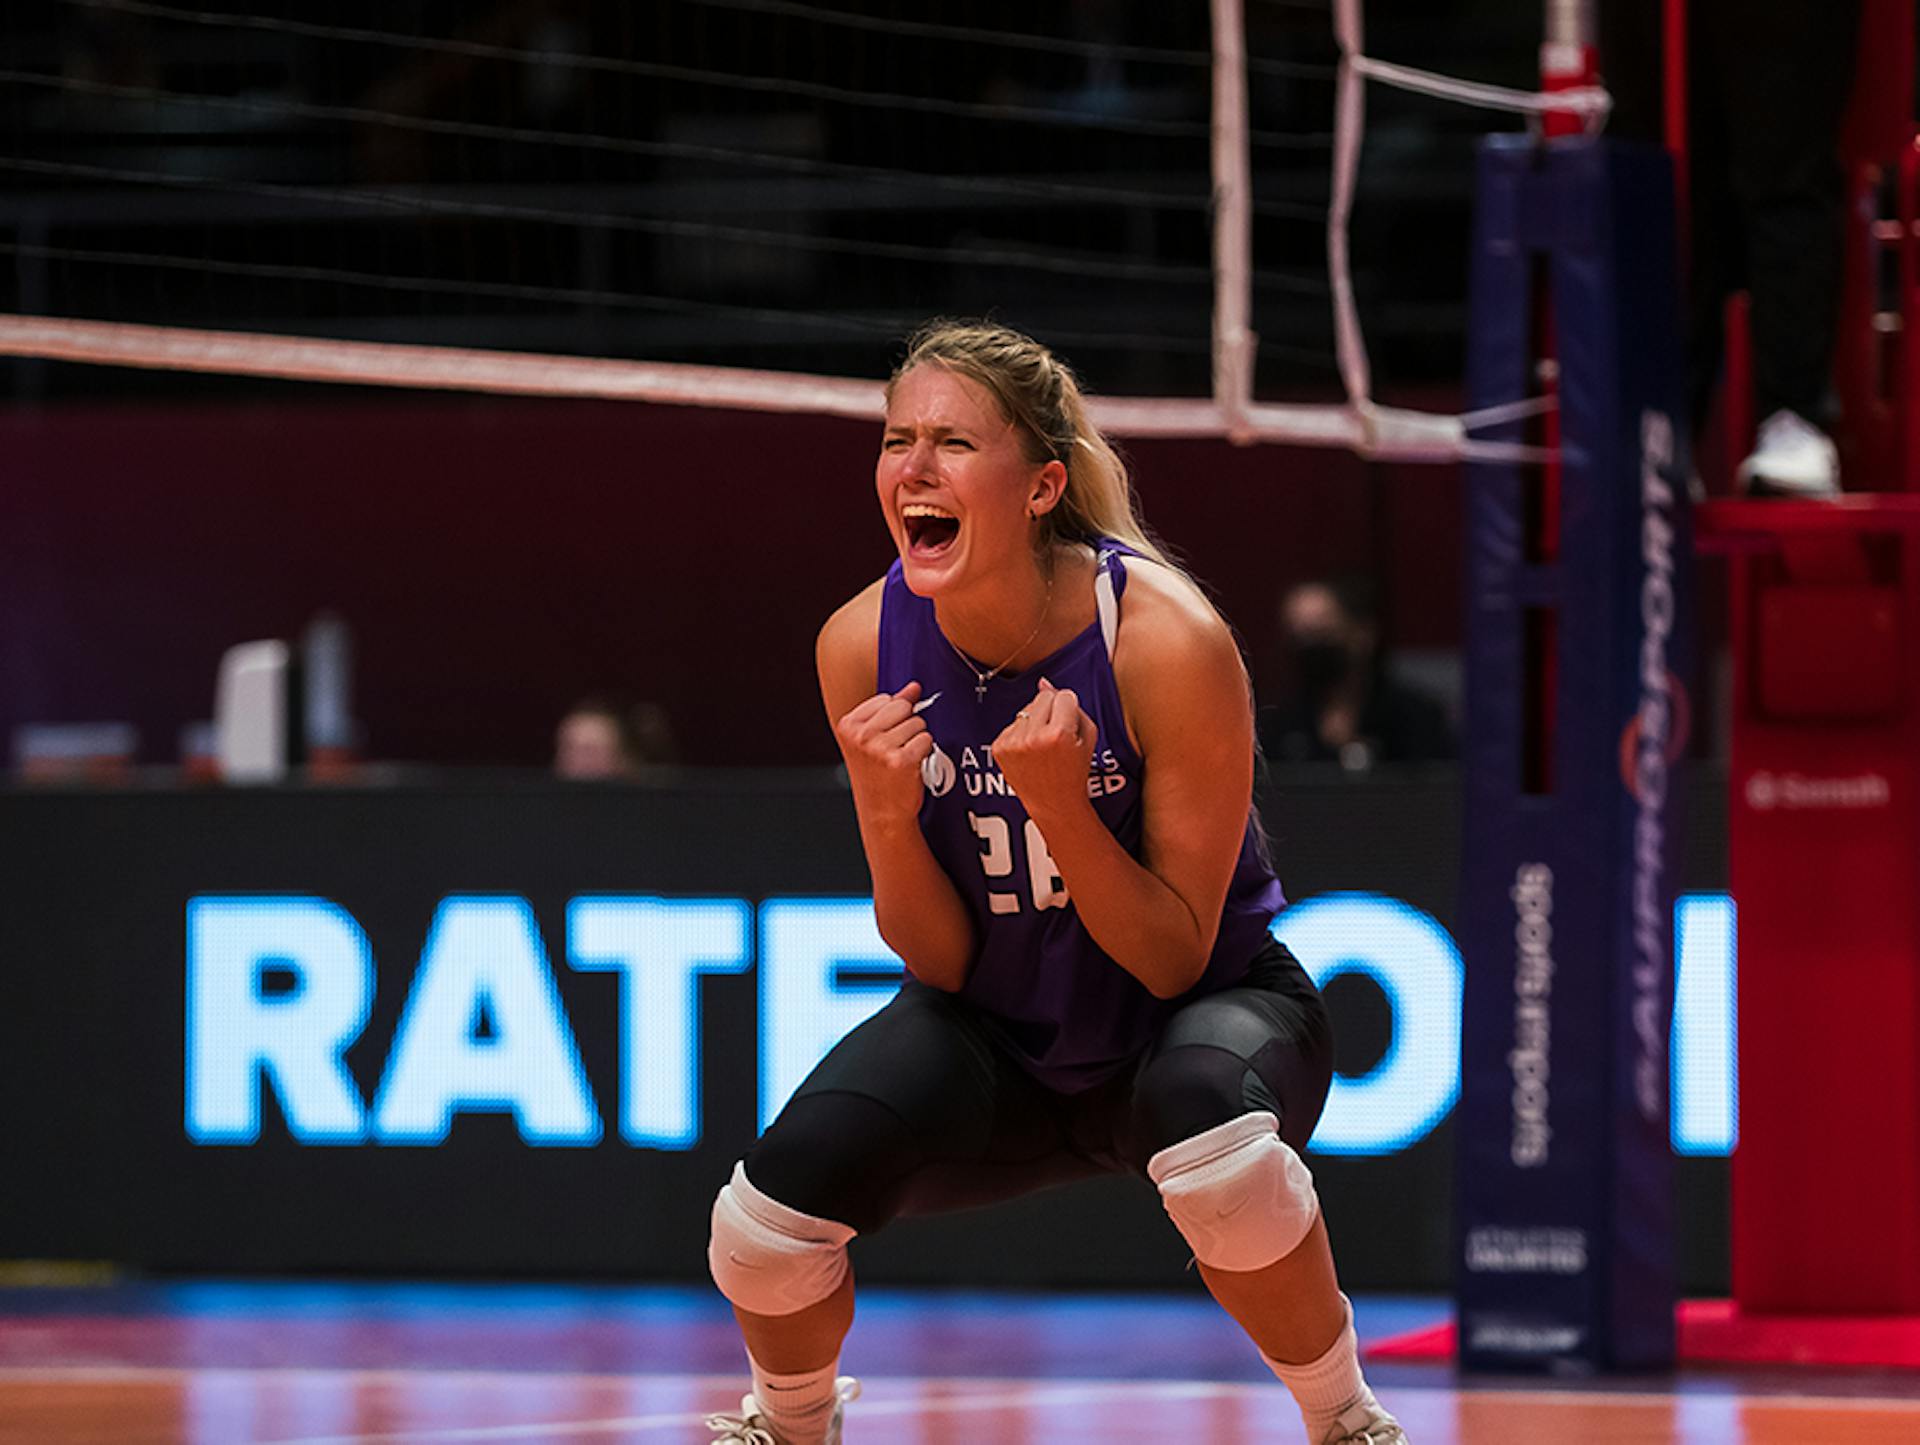 Brie King celebrates a point.